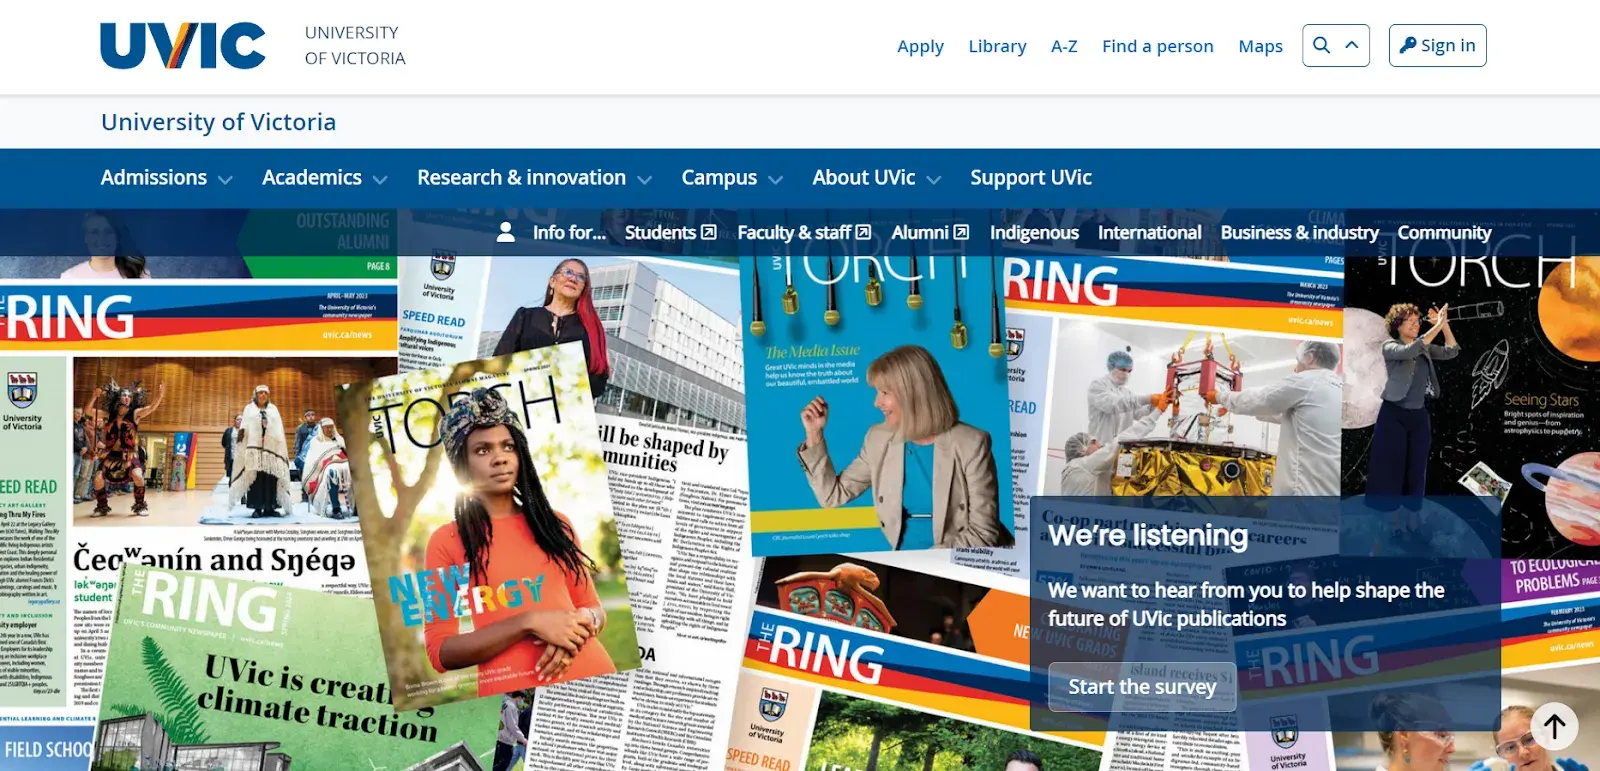 The homepage of the University of Victoria—bad UX design